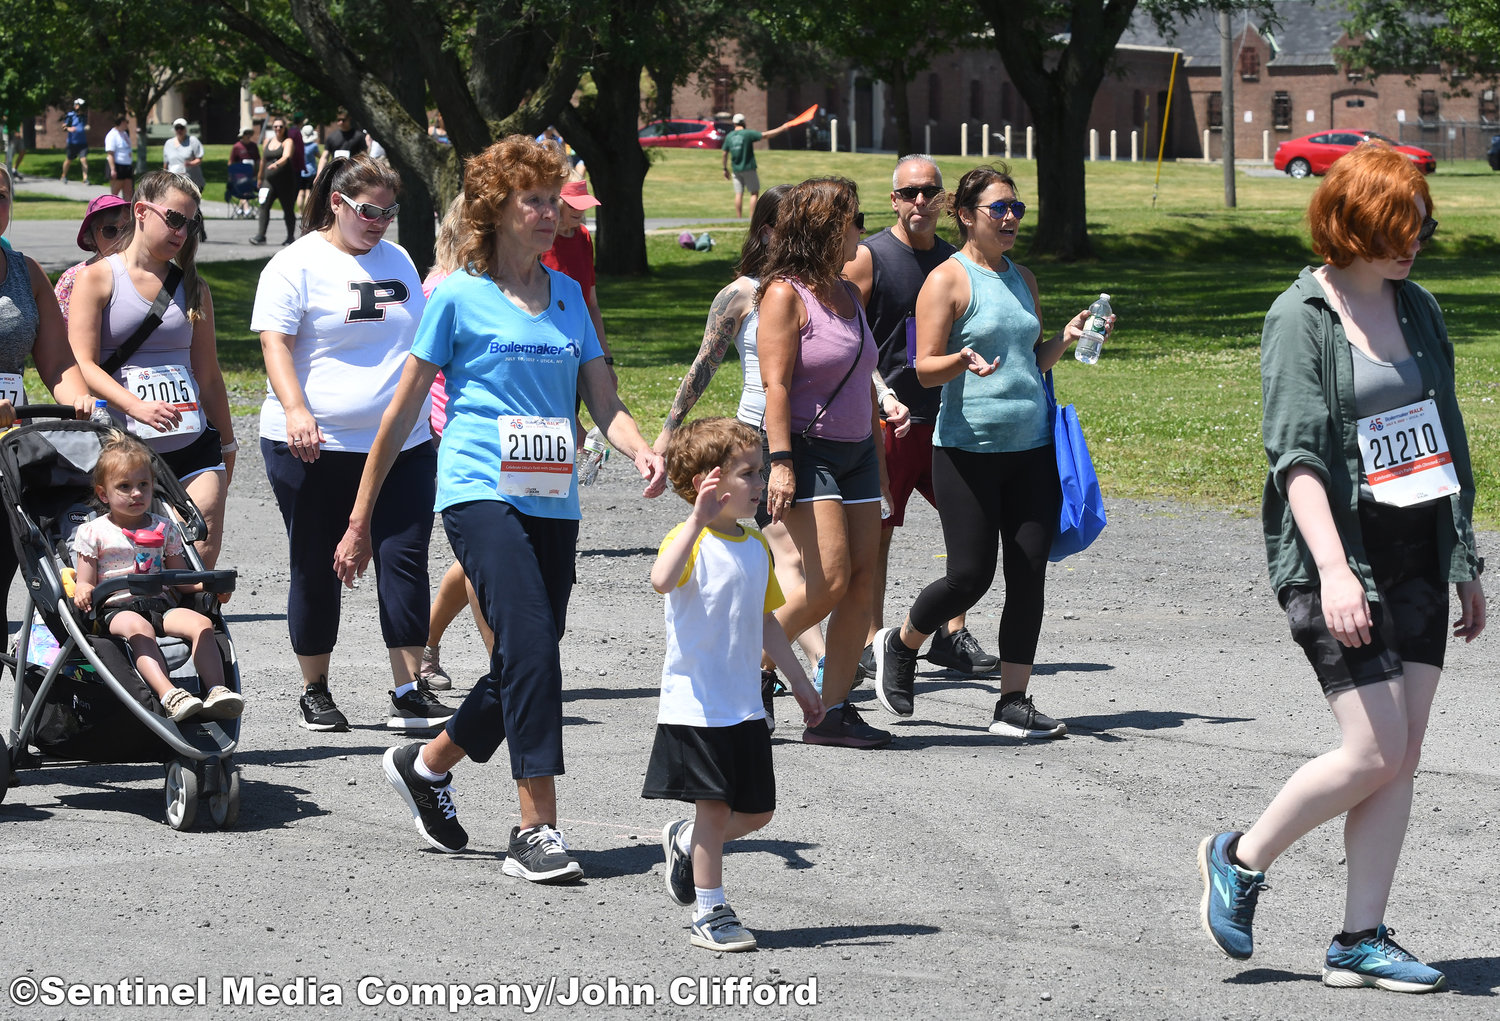 Boilermaker walk from MVCC through Proctor Park and back Saturday, July 9, 2022.